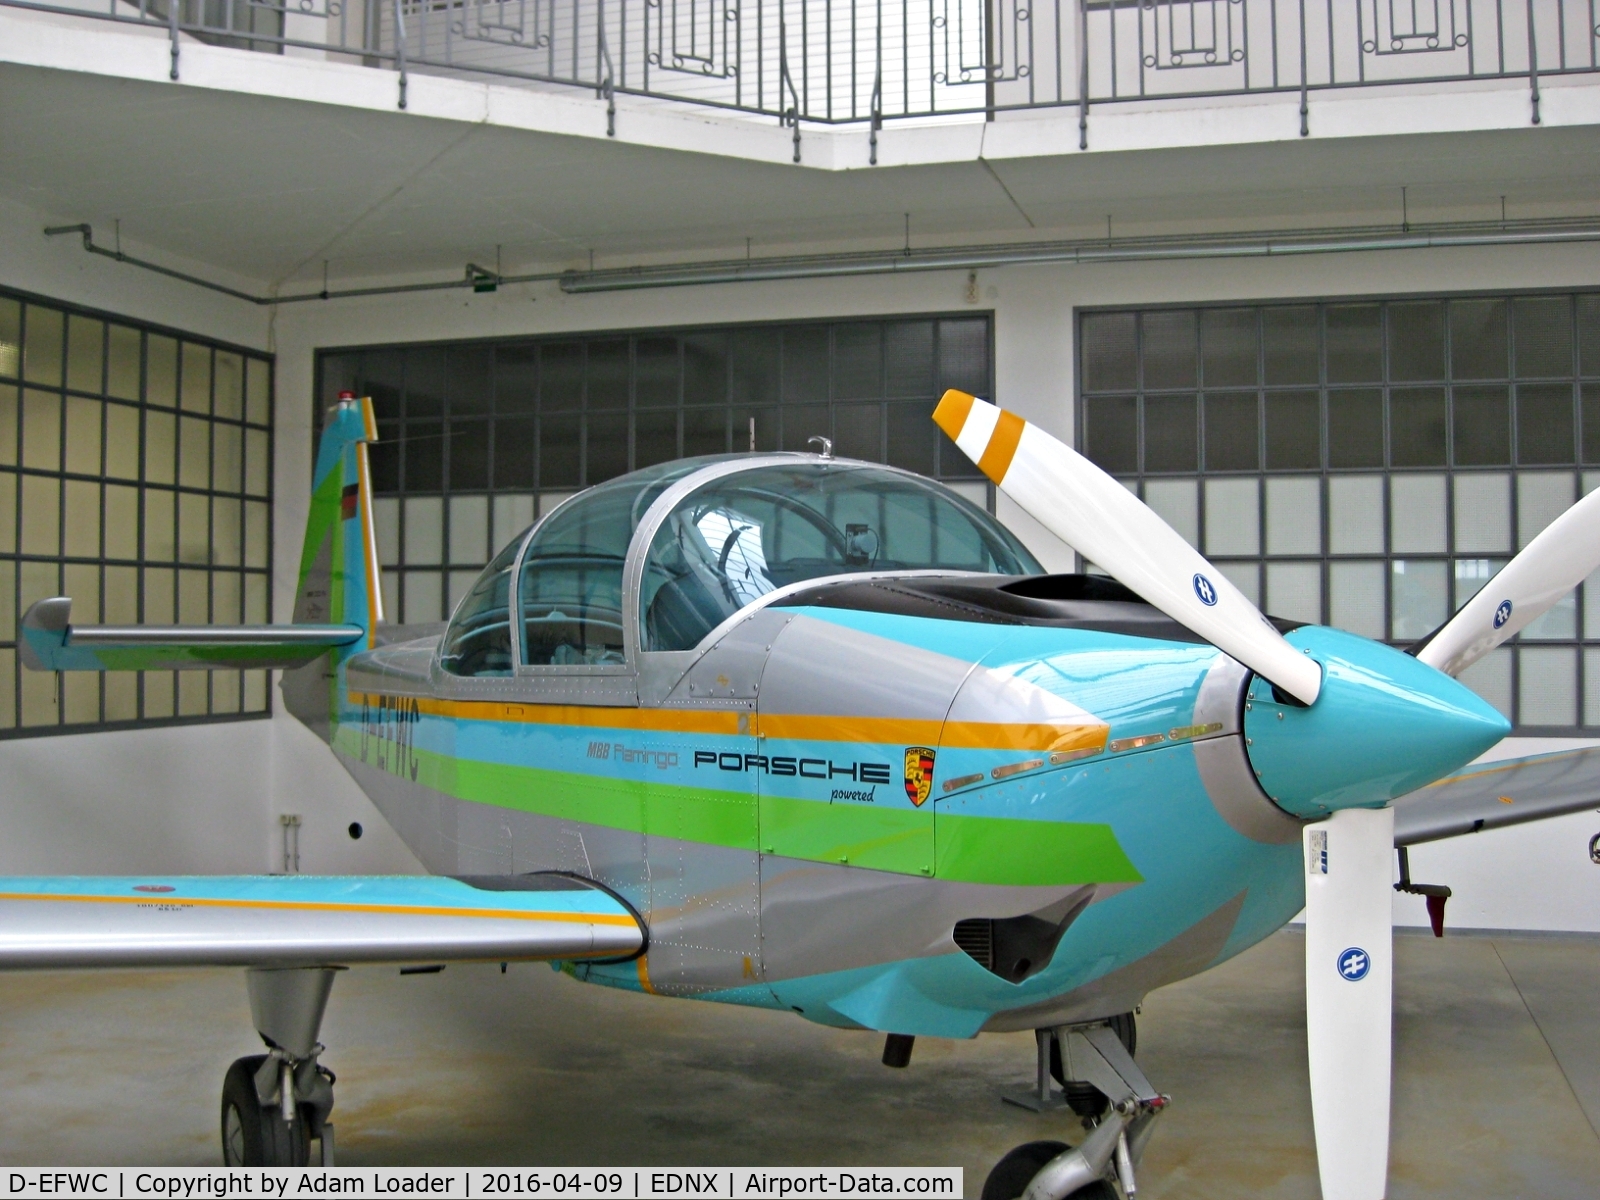 D-EFWC, MBB 223M-4 Flamingo C/N 151, D-EFWC is a rather colourful exhibit at Oberschleißheim Aviation Museum